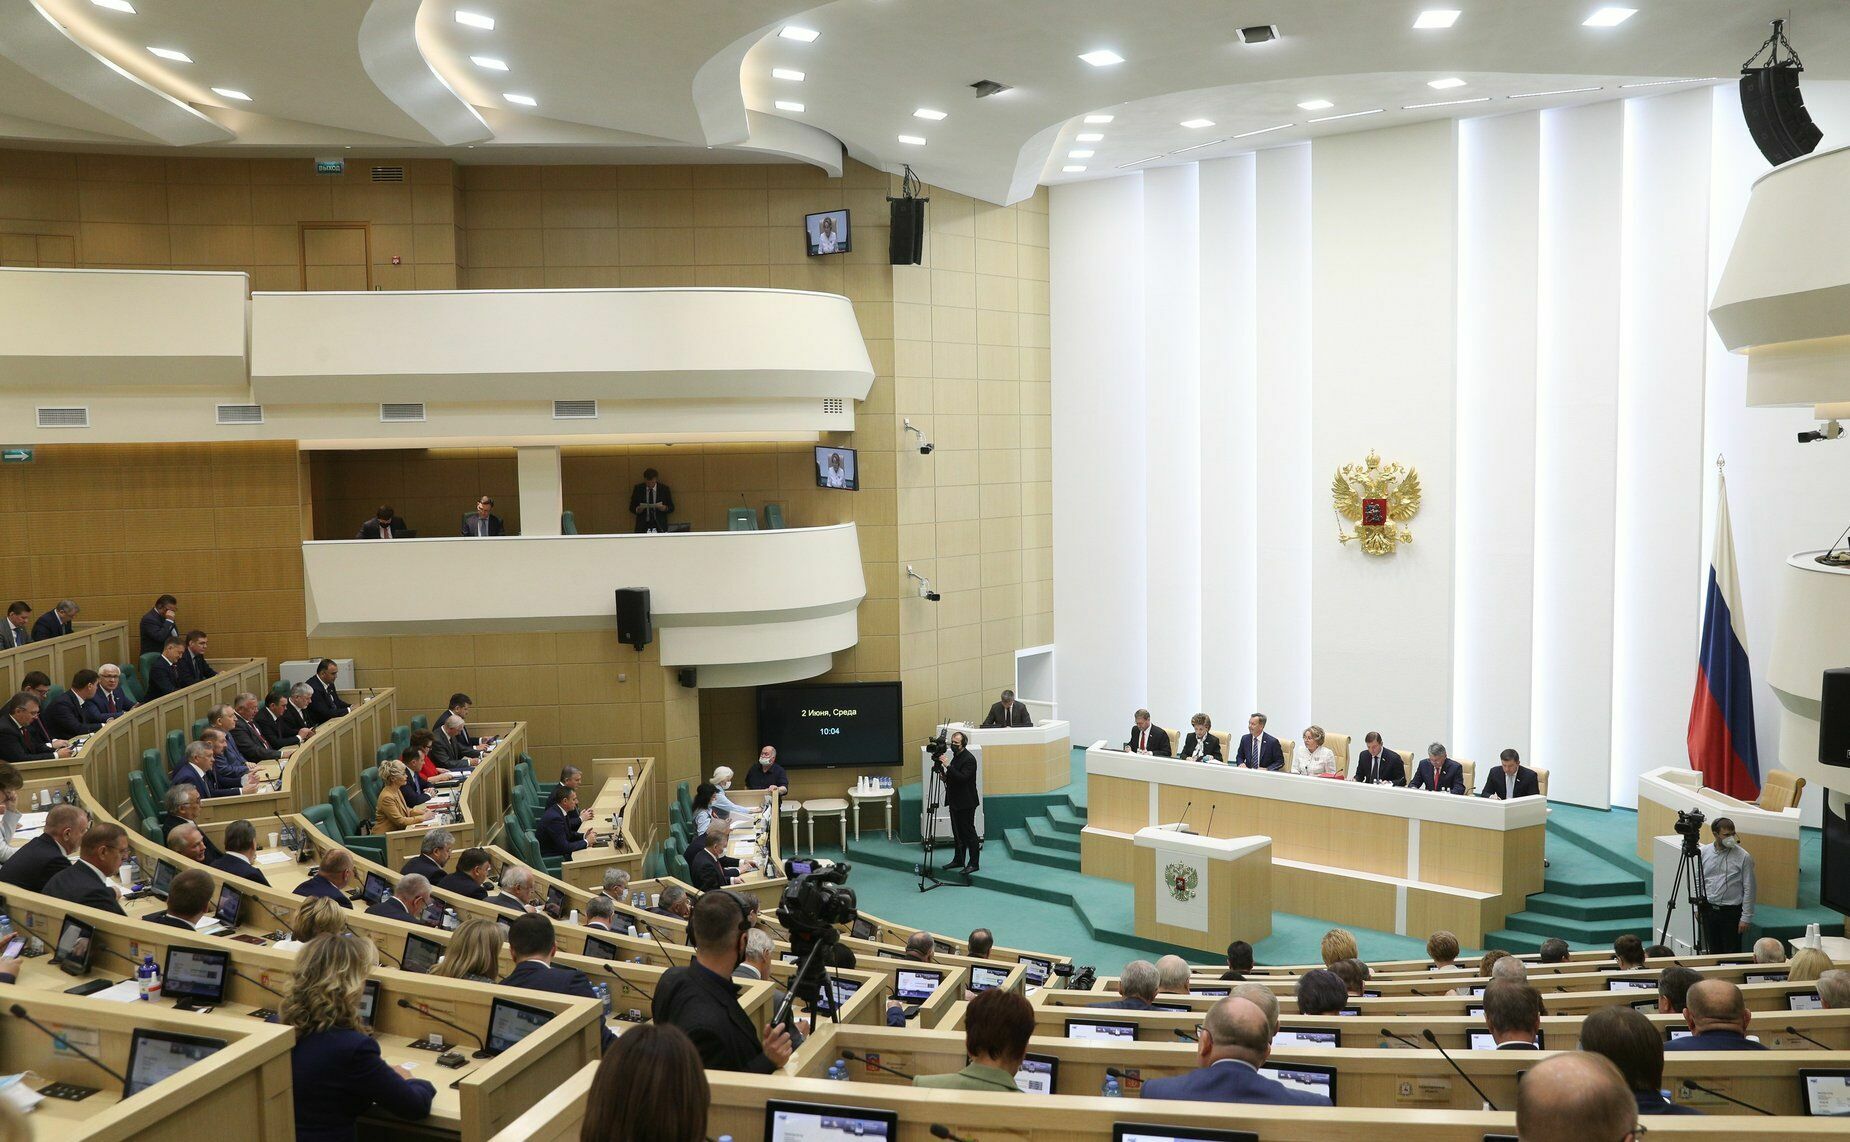 The Federation Council proposed to freeze the assets of billionaires who left the country